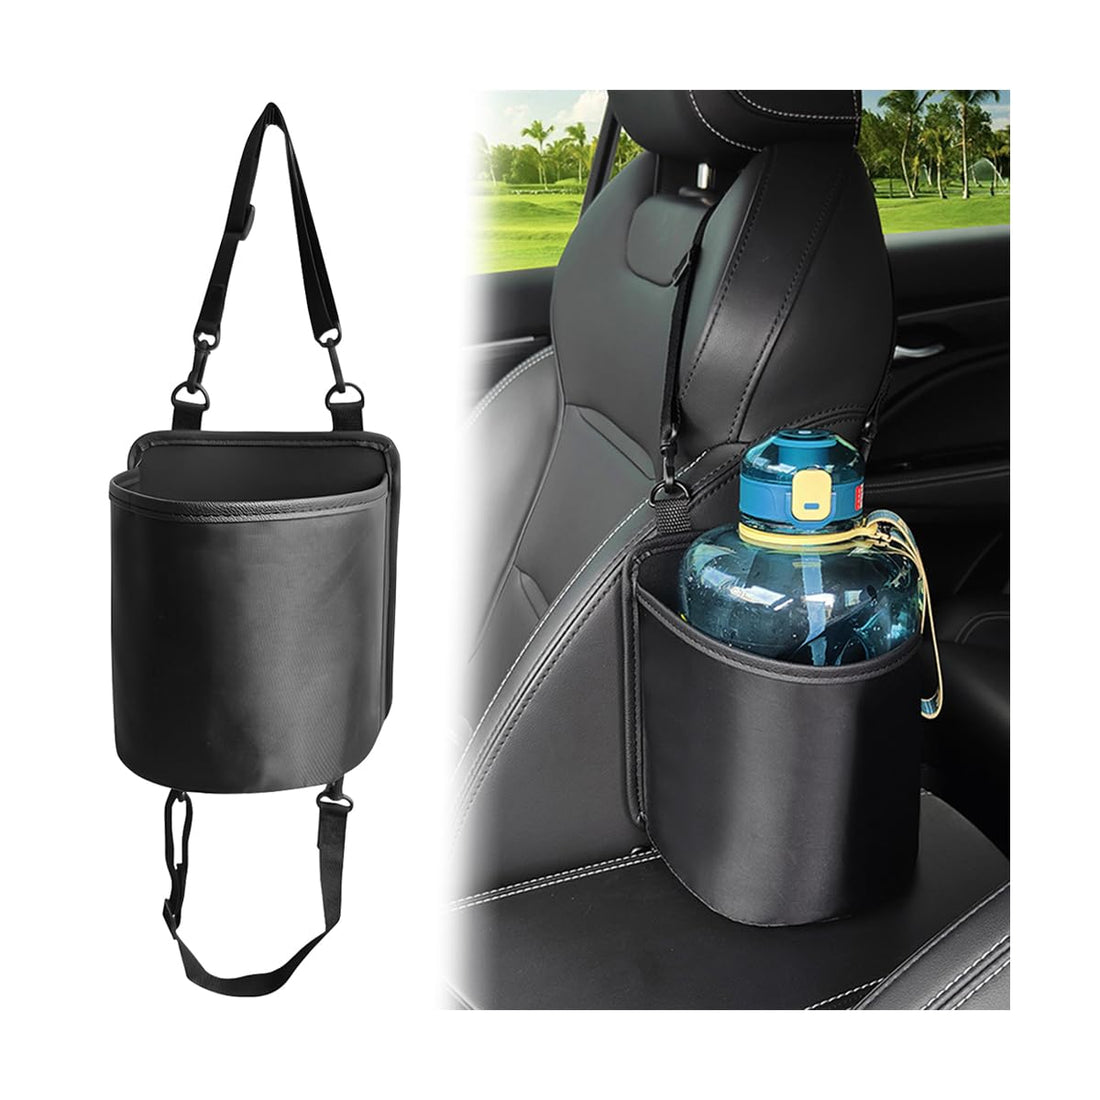 BESULEN Car Seat Side Large Cup Holder, Hanging Storage Bag for Drink Water Bottle Baby Stuff, Multi-Functional Auto Organizer with Waterproof Liner, Universal Car Accessories Road Trip Essentials